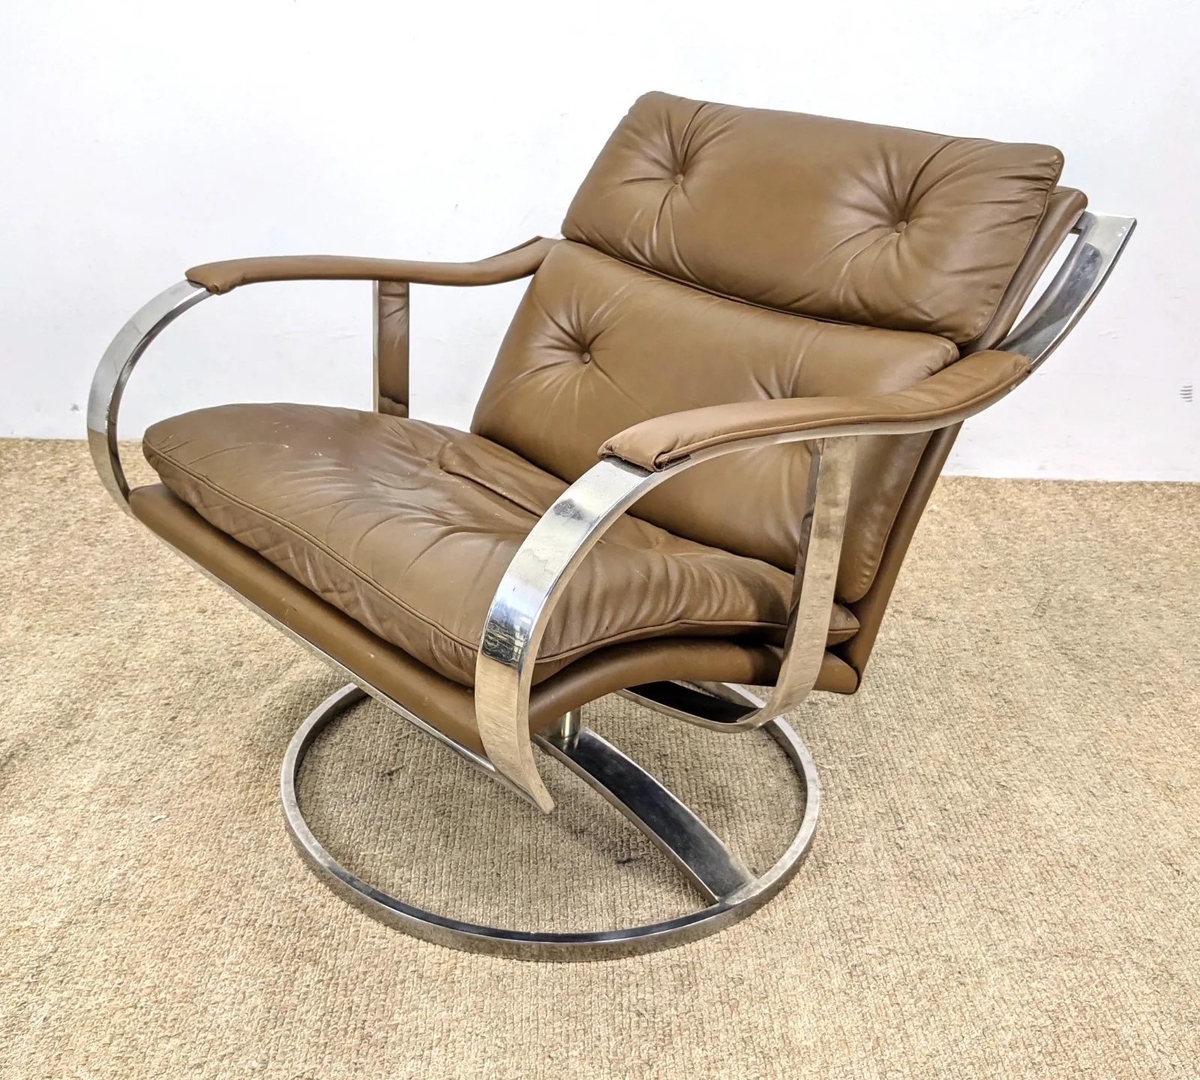 Steelcase Lounge Chair